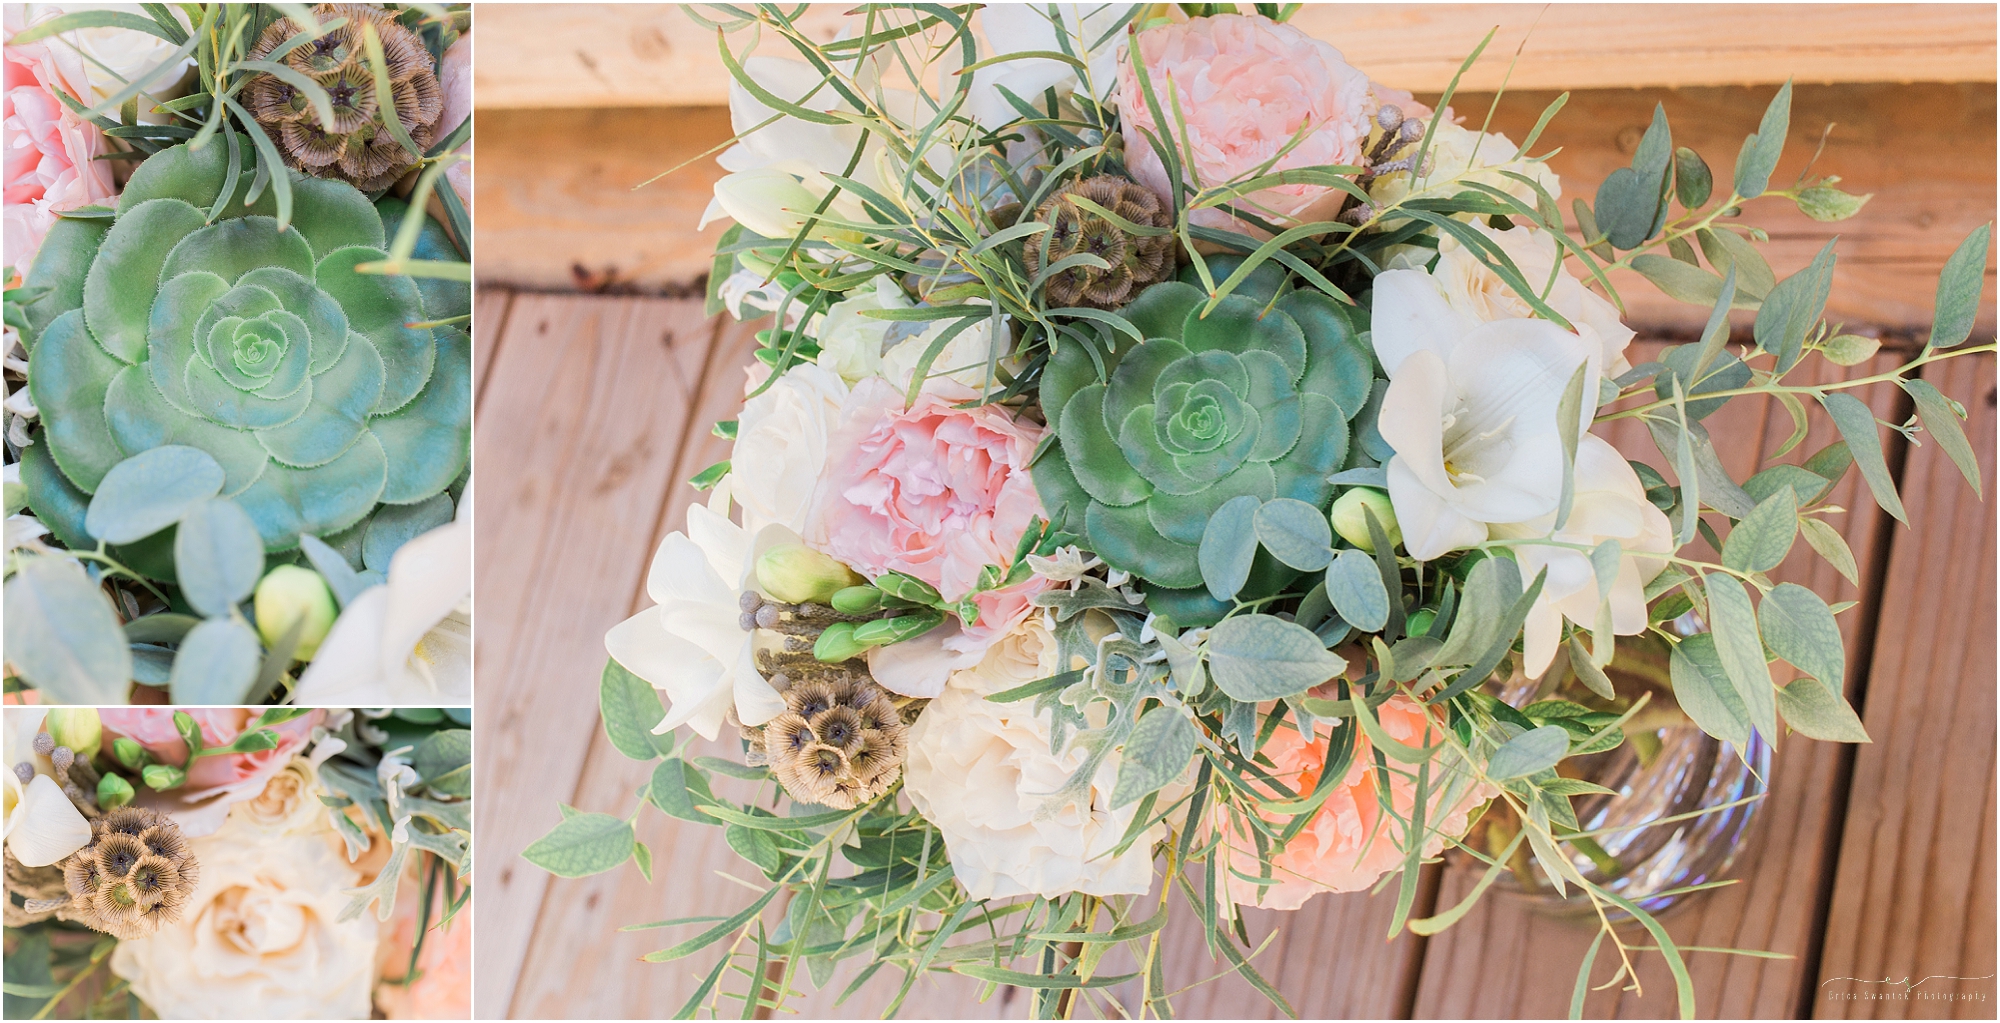 An amazing bridal bouquet made of succulents and soft colors for this rustic Oregon lodge wedding in Bend, OR. 